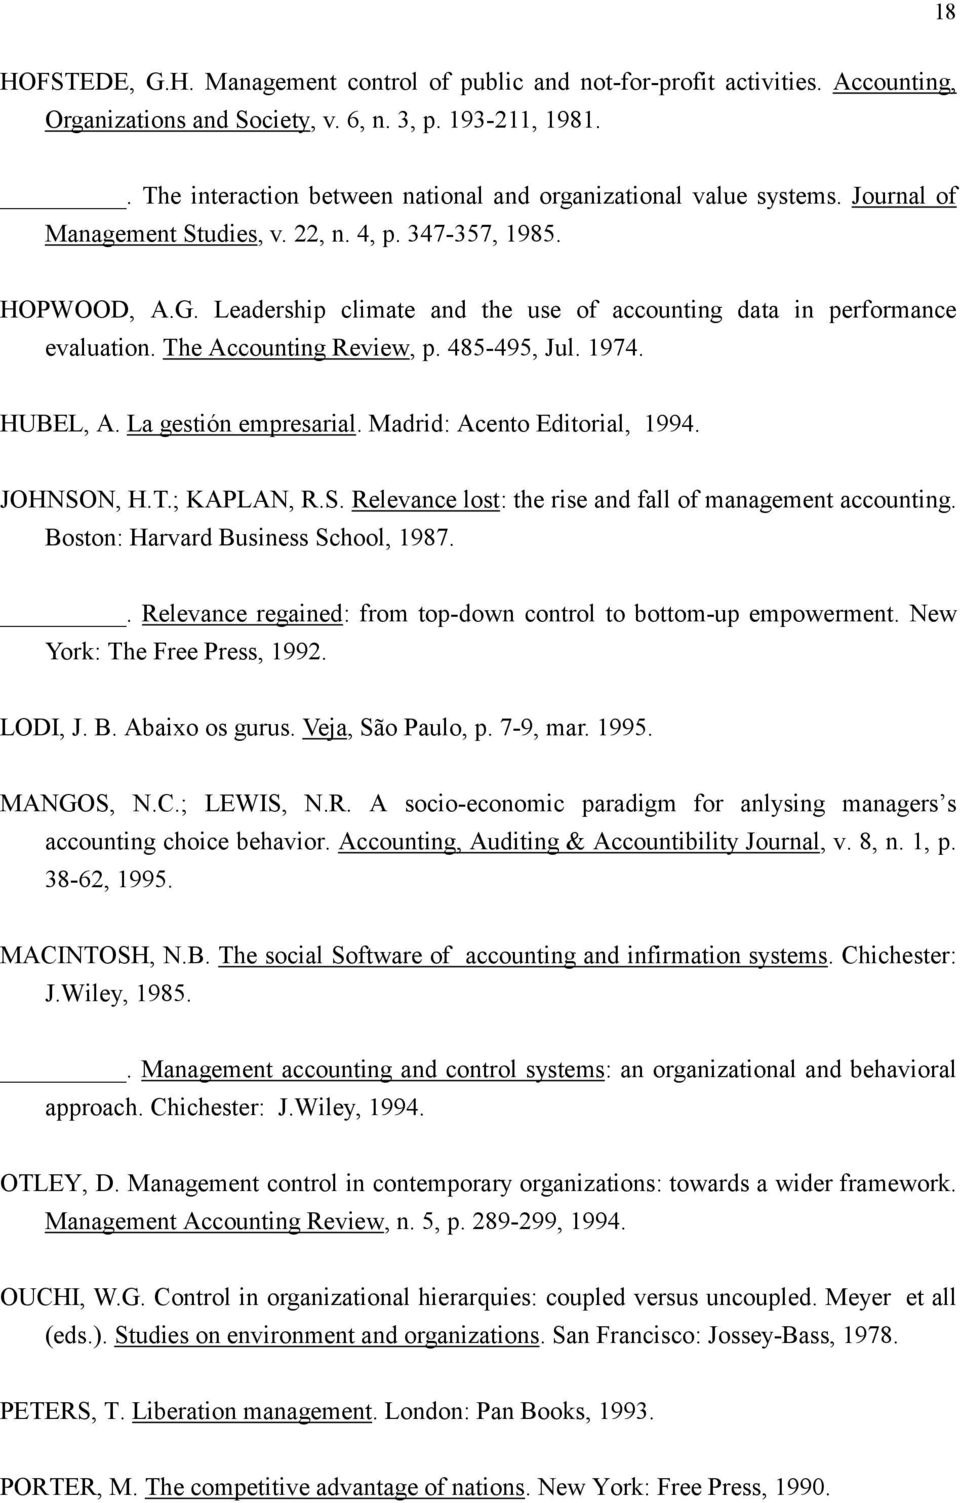 Leadership climate and the use of accounting data in performance evaluation. The Accounting Review, p. 485-495, Jul. 1974. HUBEL, A. La gestión empresarial. Madrid: Acento Editorial, 1994. JOHNSON, H.